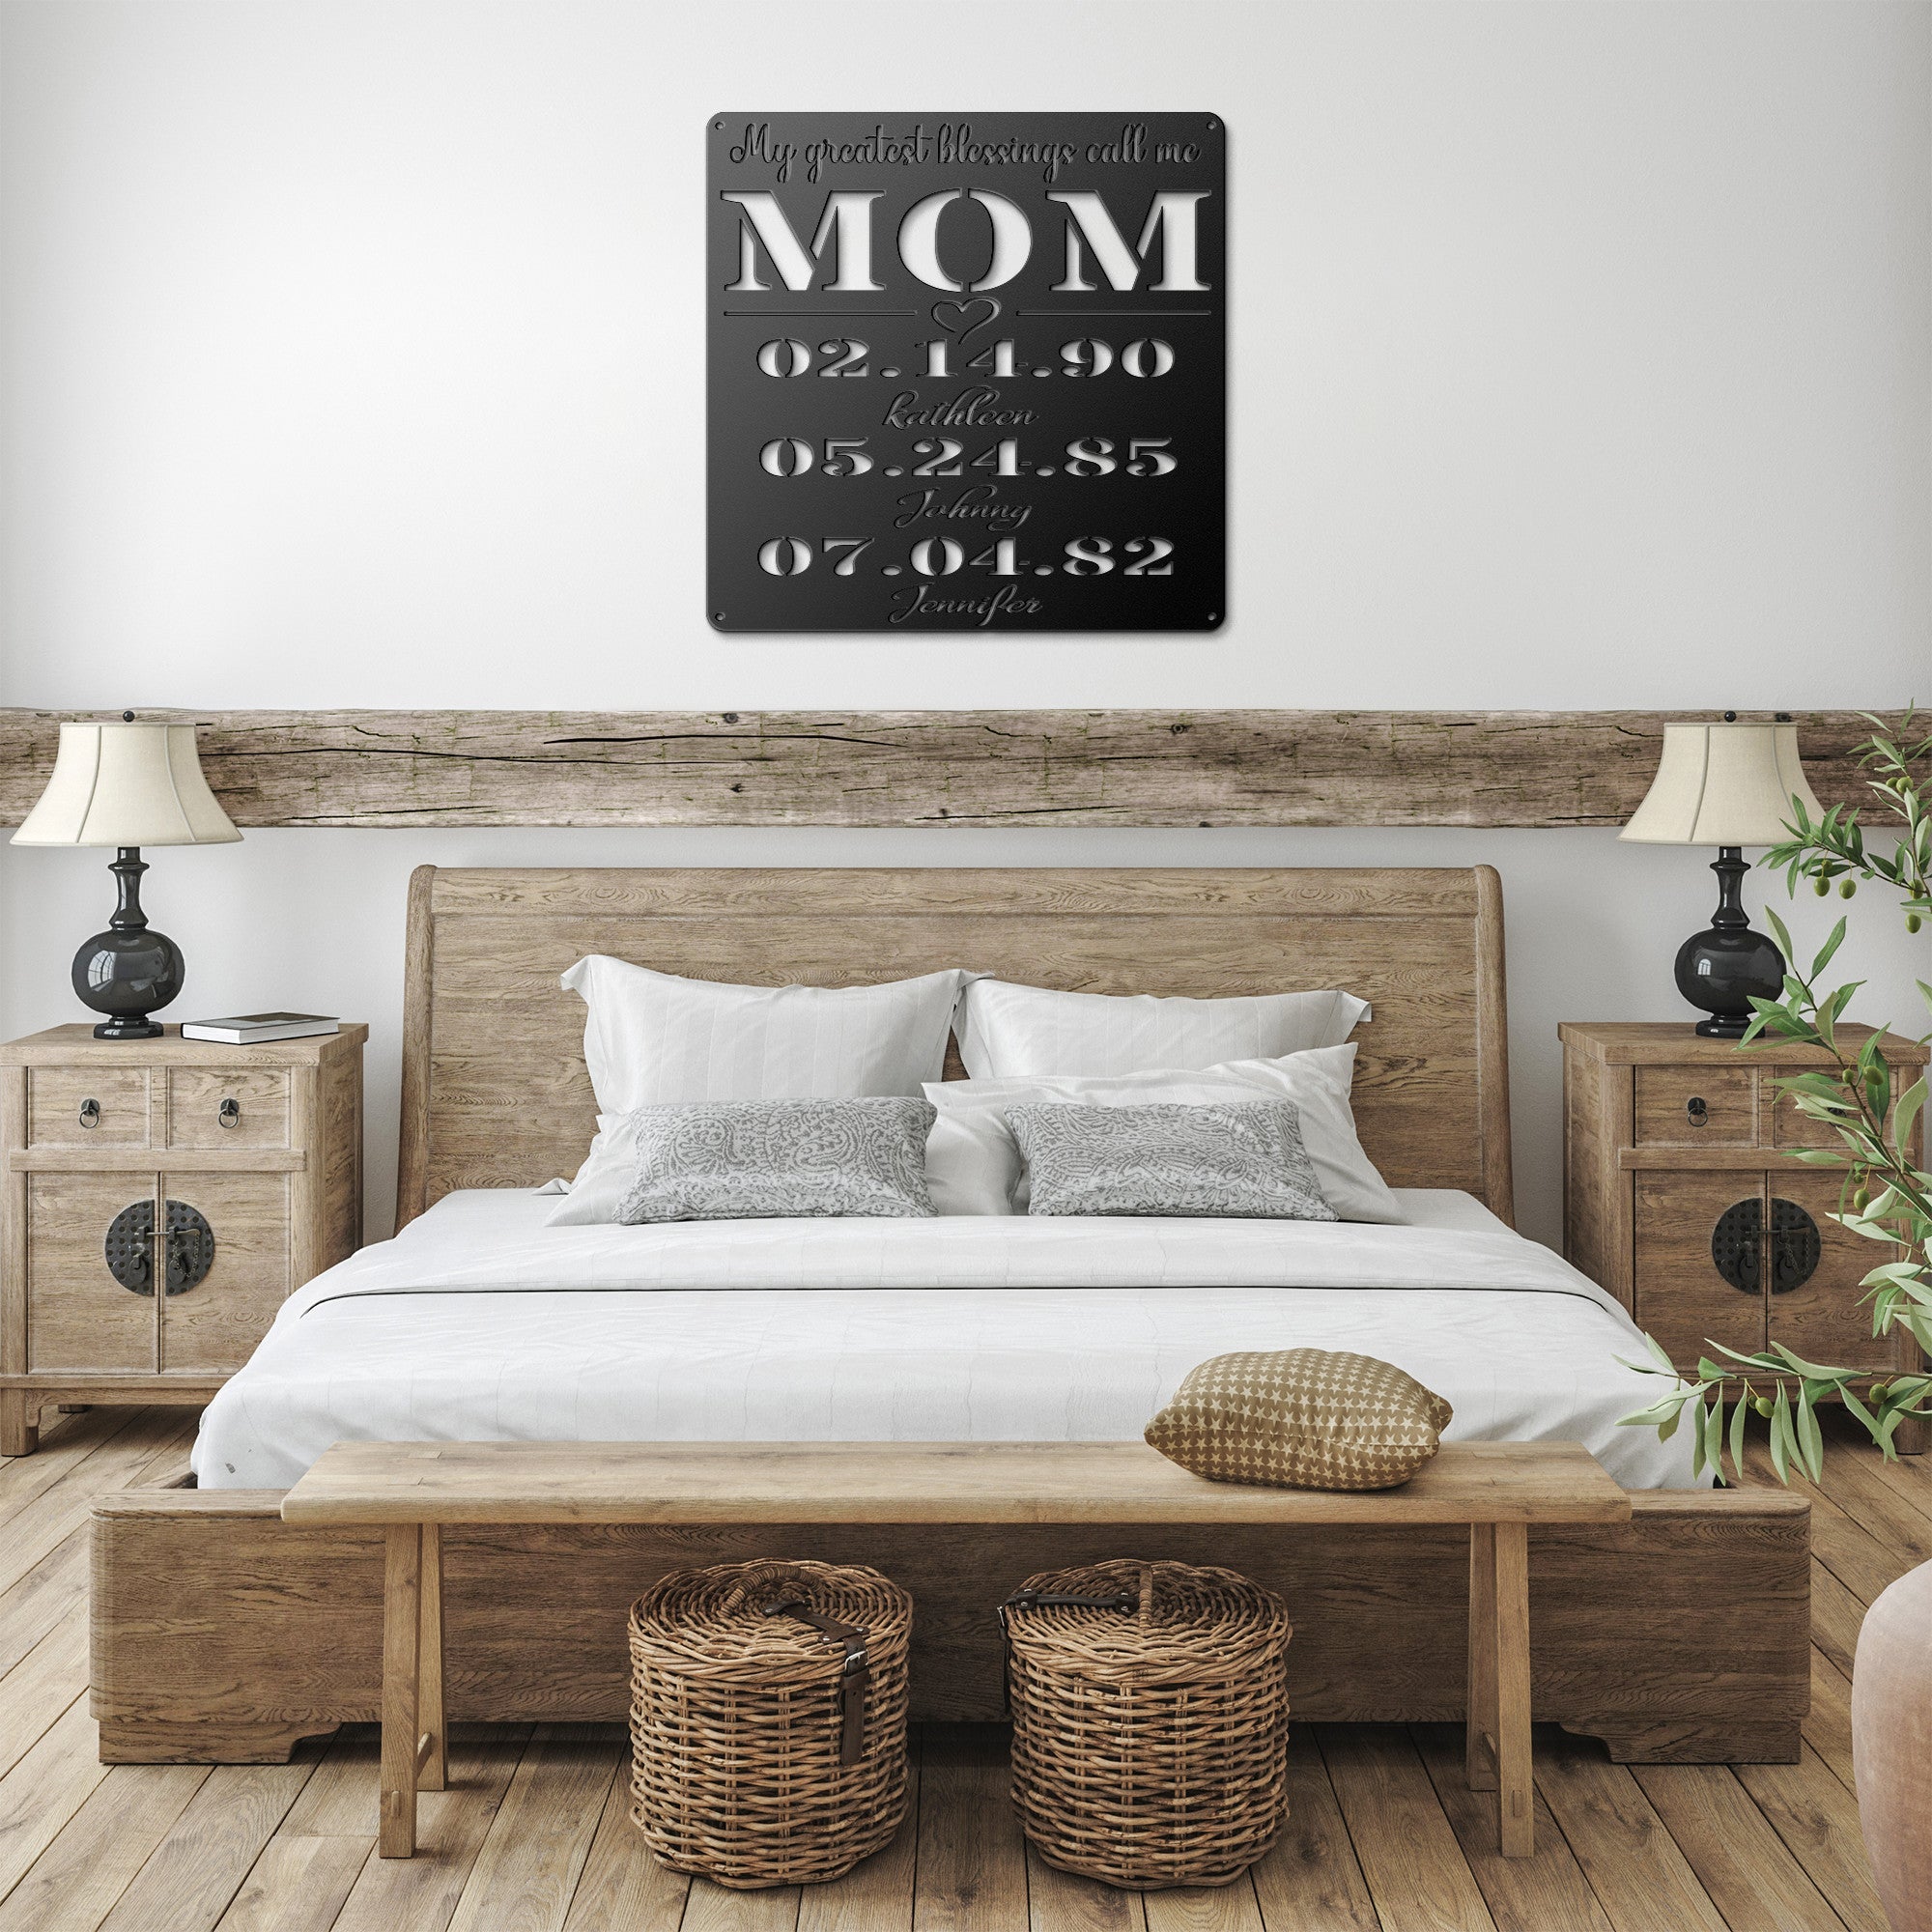 Personalized MOM Plaque - Cool Metal Signs